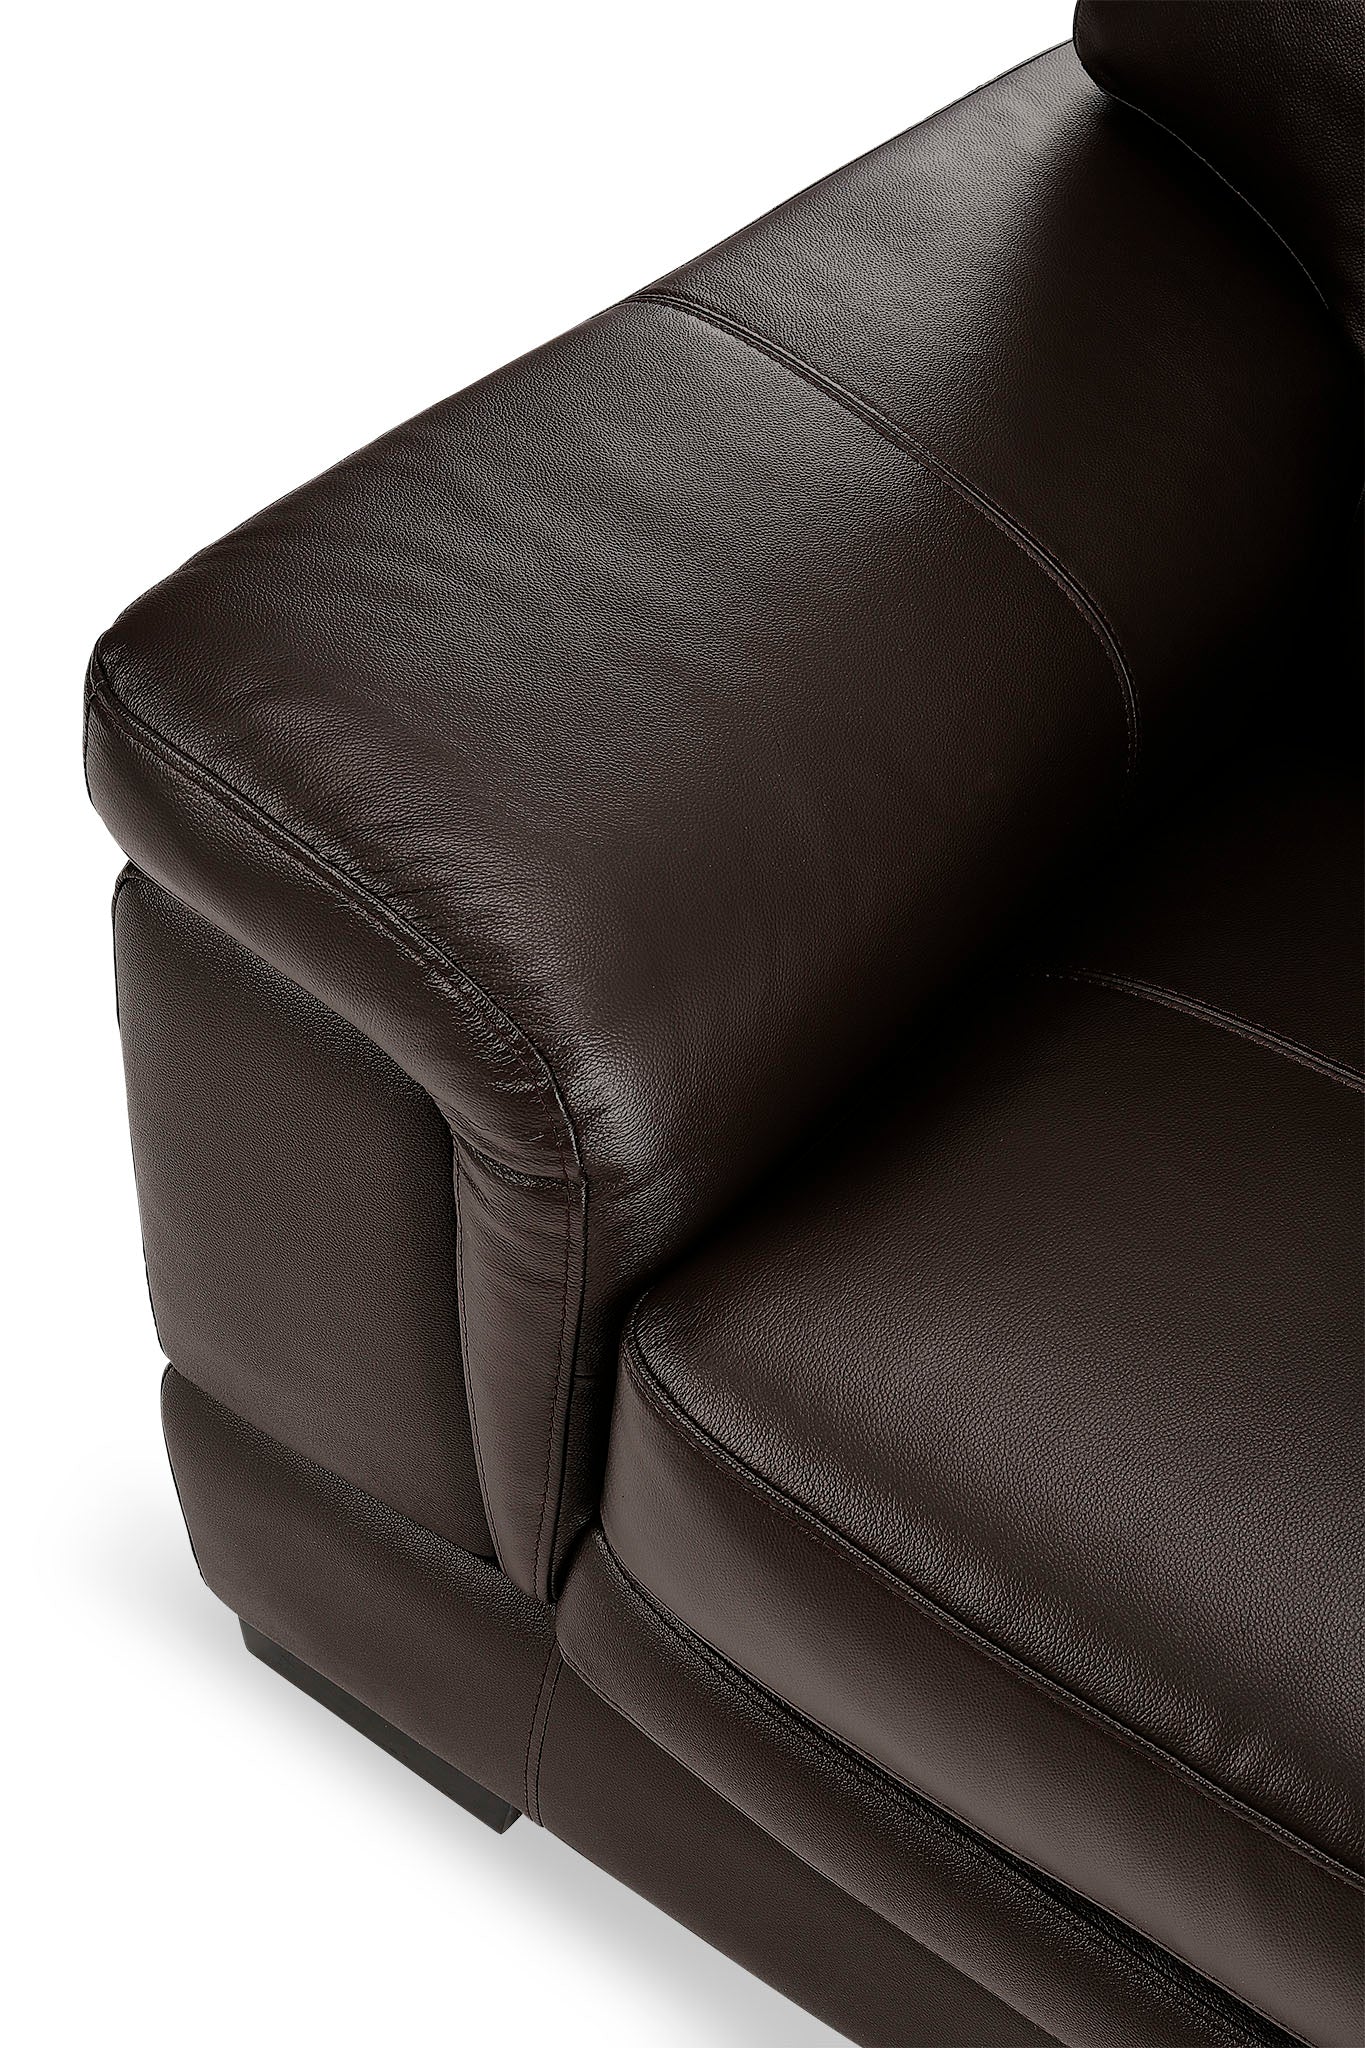 Lenny Chair - Brown